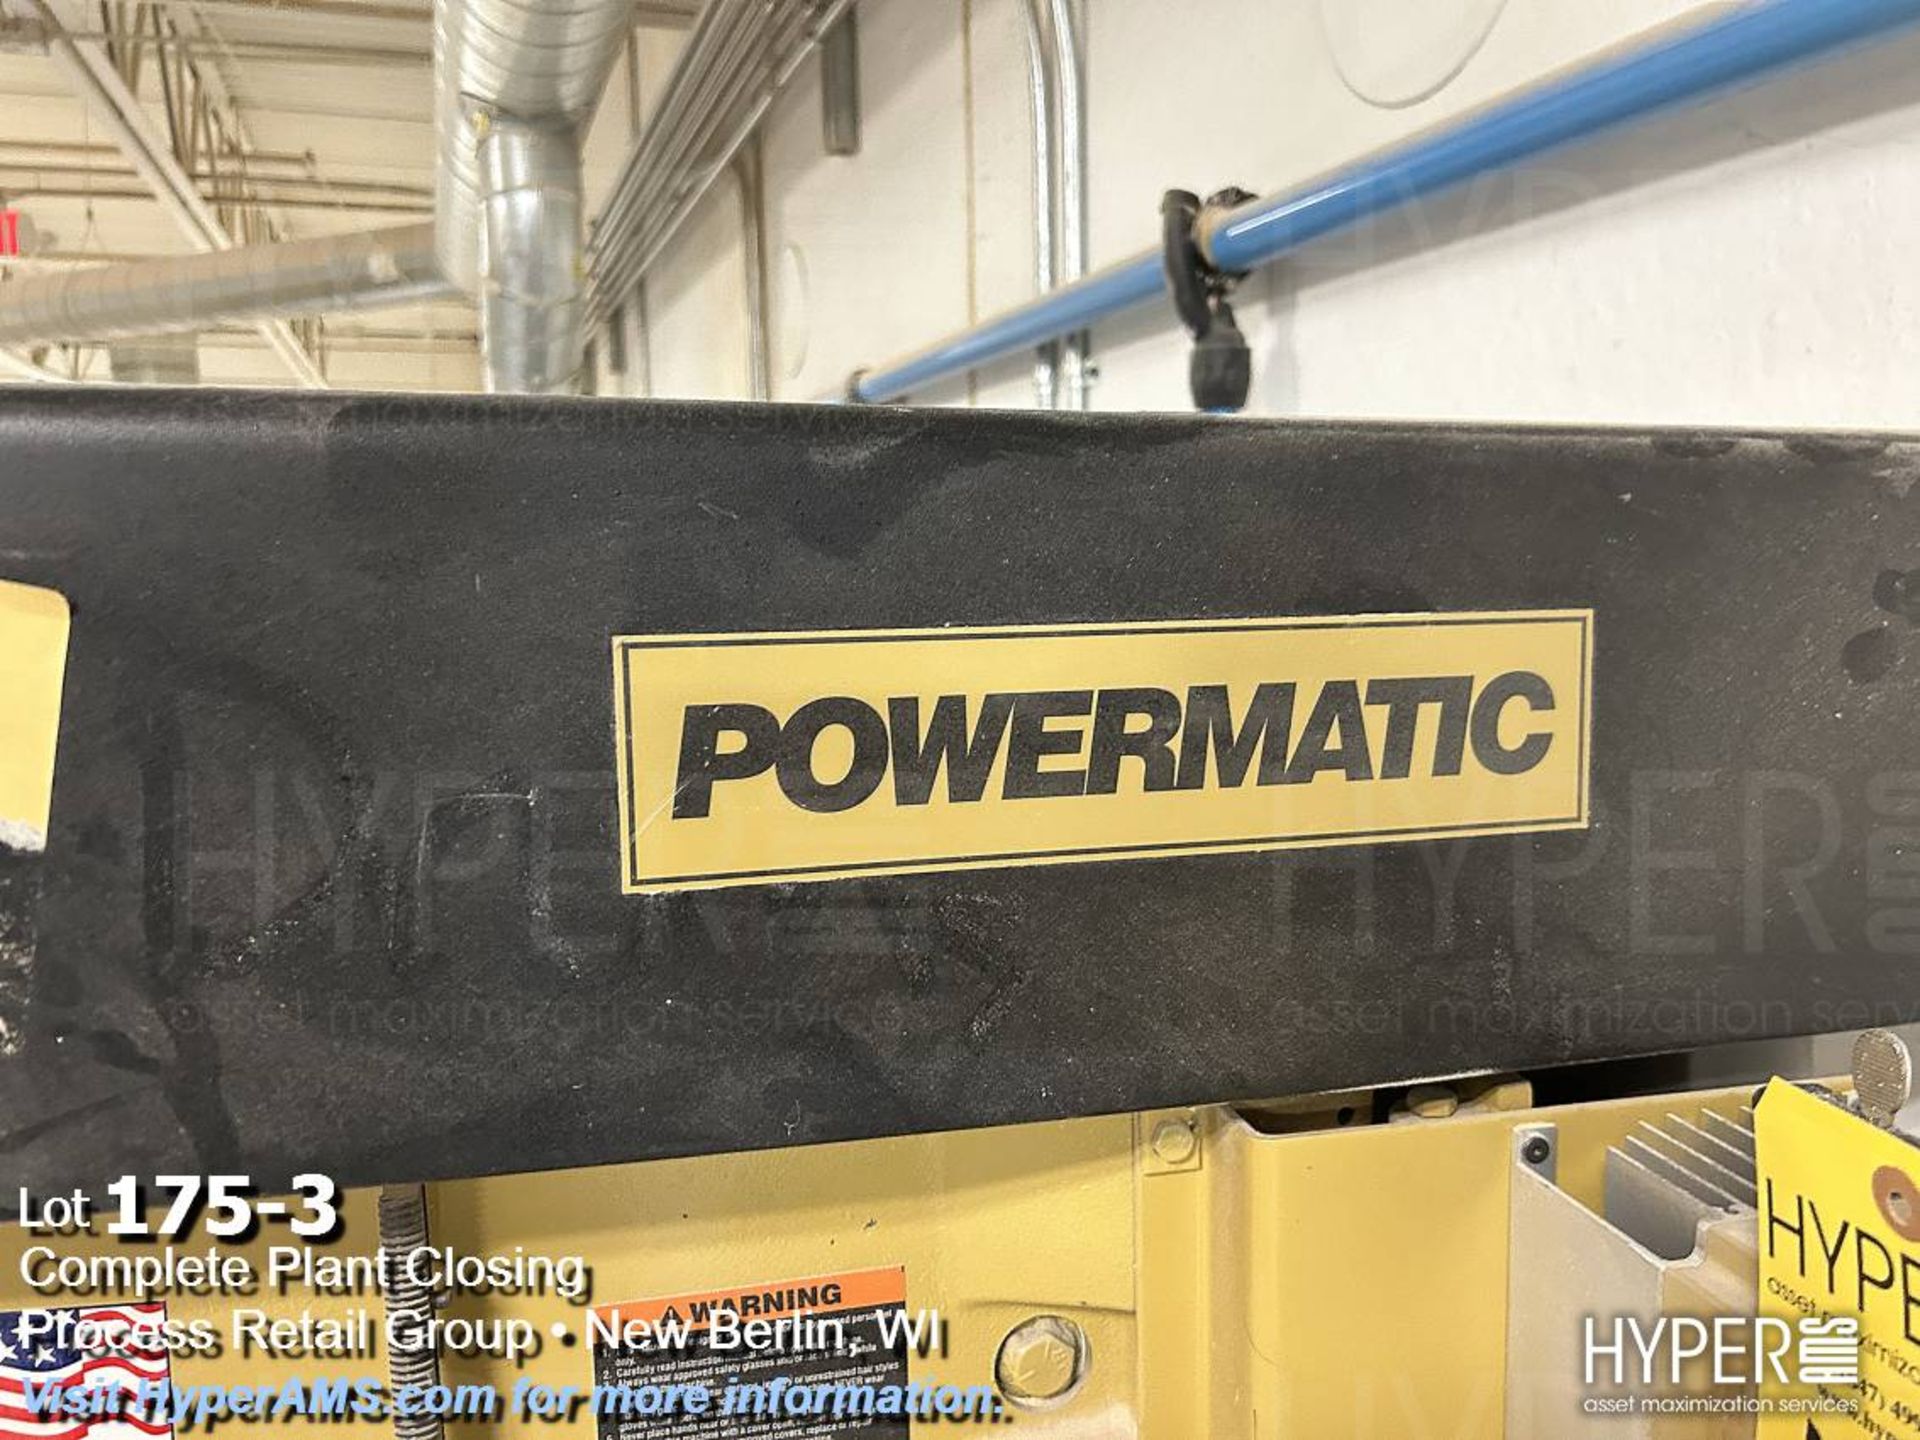 Powermatic 1hp variable speed drill press - Image 3 of 6